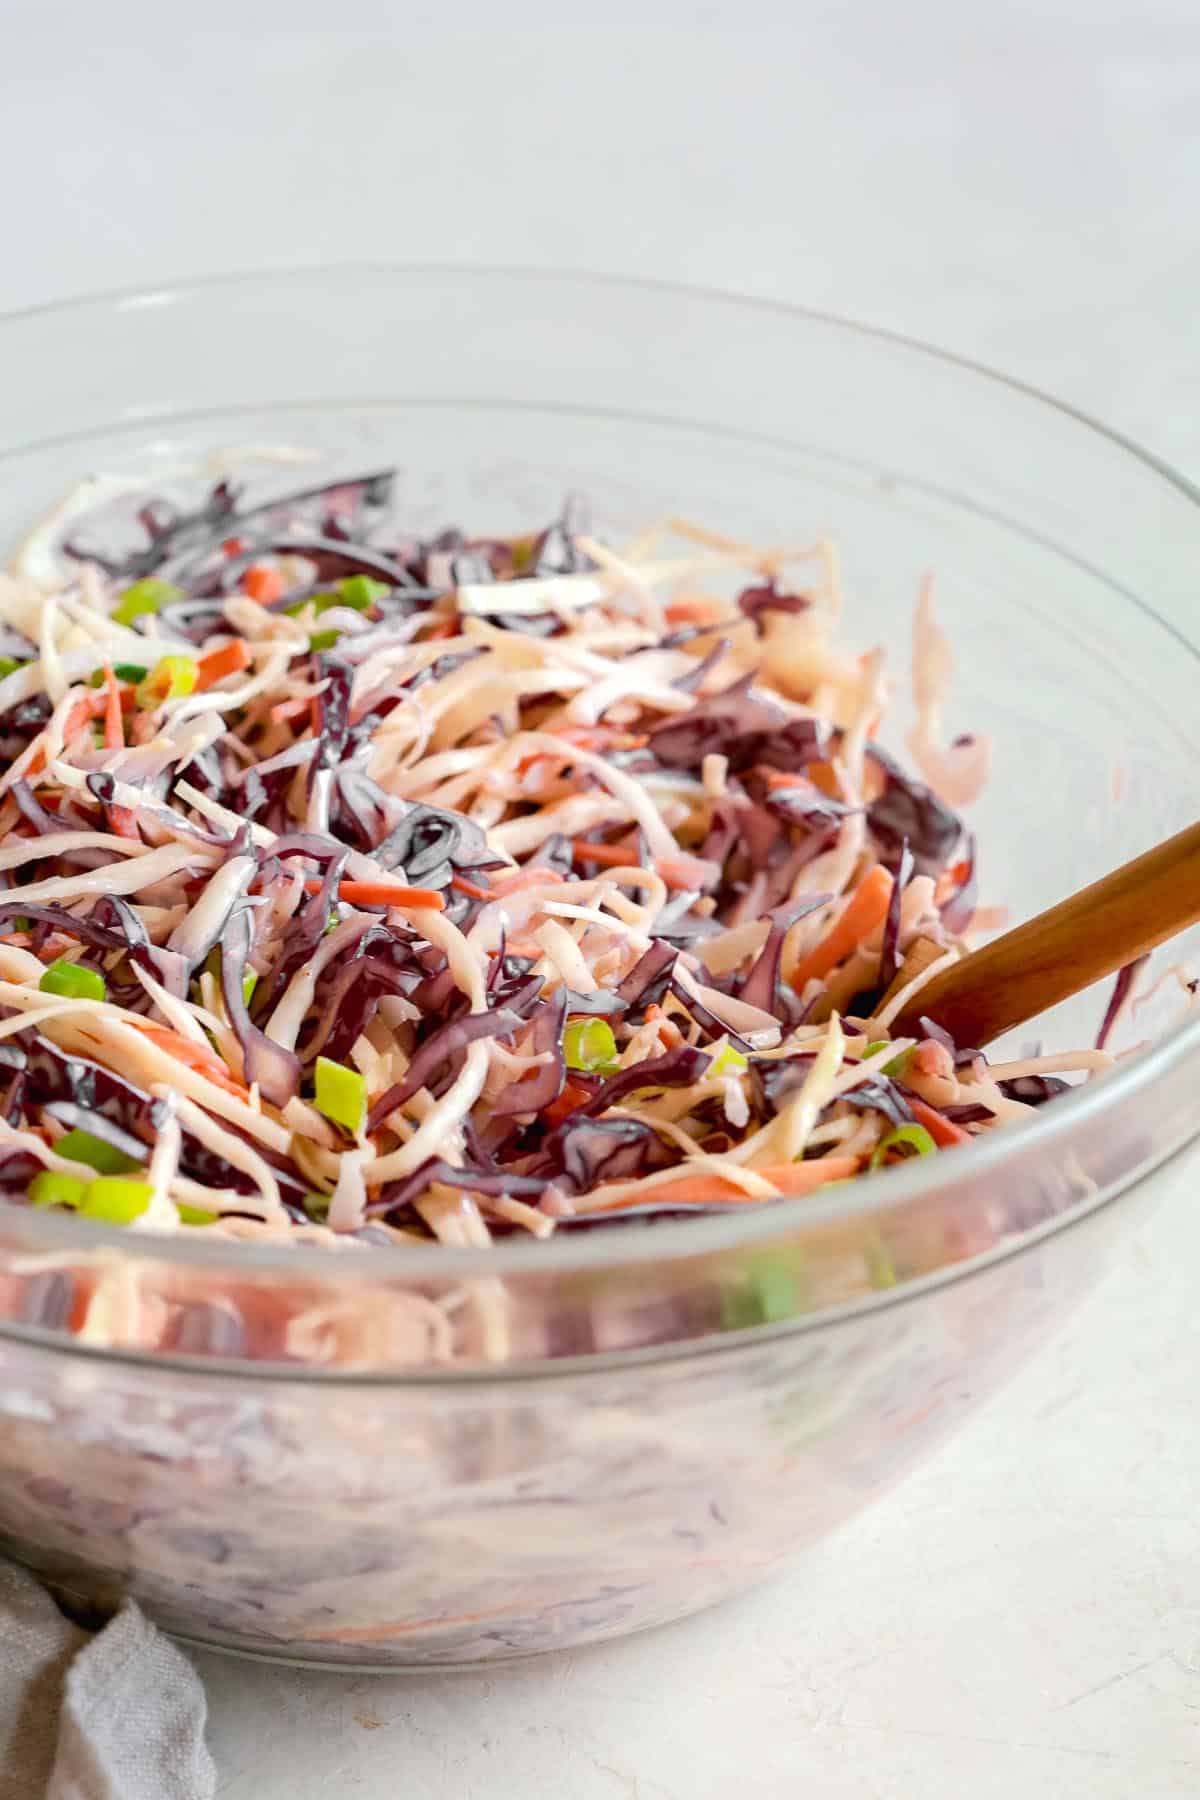 clear bowl of coleslaw salad with dressing